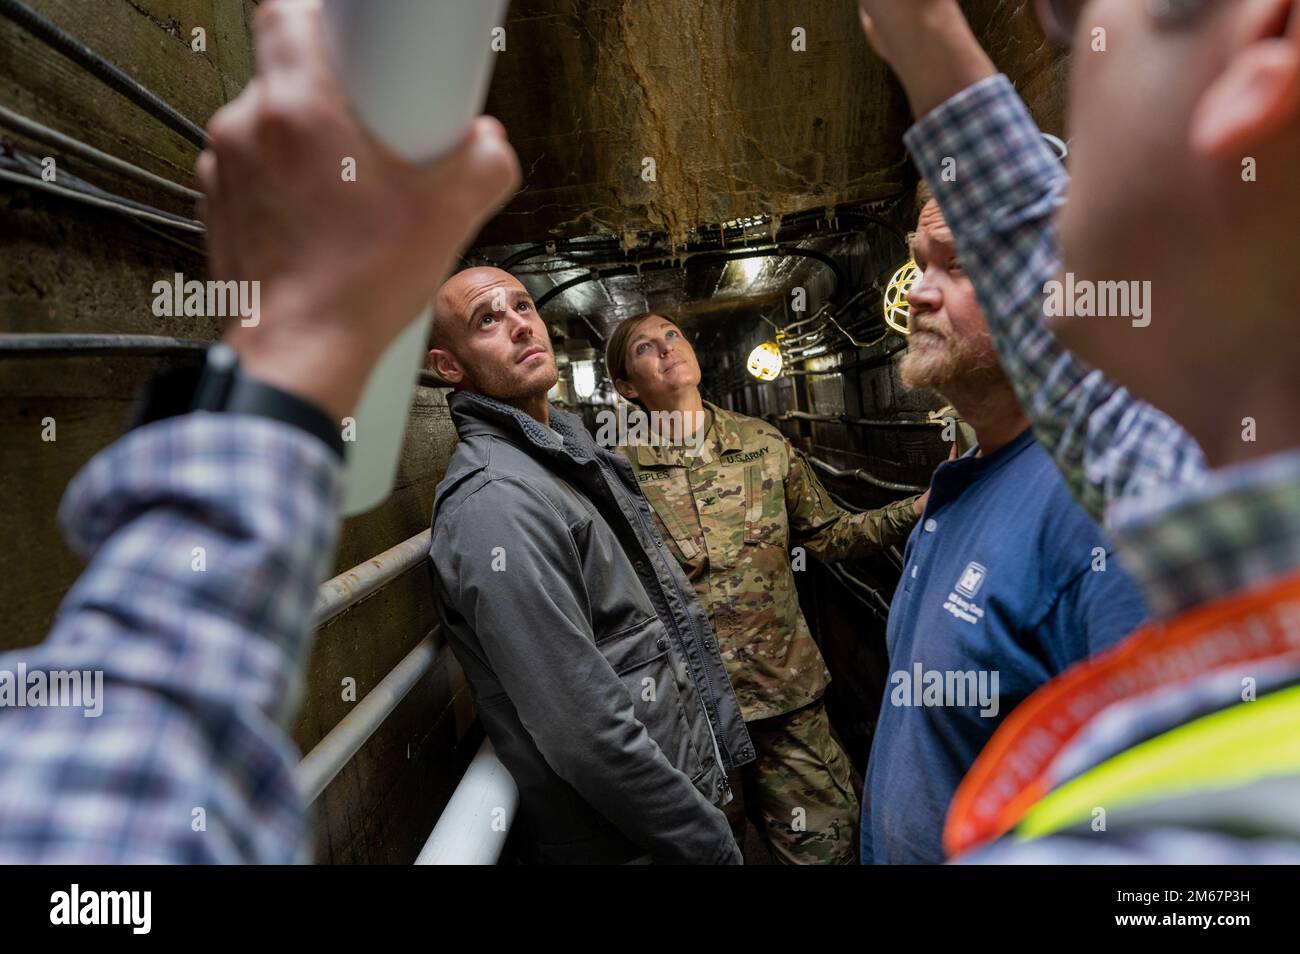 Vince DeCarlo (right), U.S. Army Corps of Engineers Pittsburgh District operations chief, briefs Col. Kimberly Peeples (center), commander and district engineer of the Great Lakes and Ohio River Division, during a tour to show piping work being completed at C.W. Bill Young Lock & Dam in New Kensington, Pennsylvania, April 13, 2022. Employees at the facility have been replacing more than 700 feet of hydraulic pipes that will save the district more than $150,000 in contracted costs. The hydro lines control the opening and closing of gates and valves for lock operations. Stock Photo